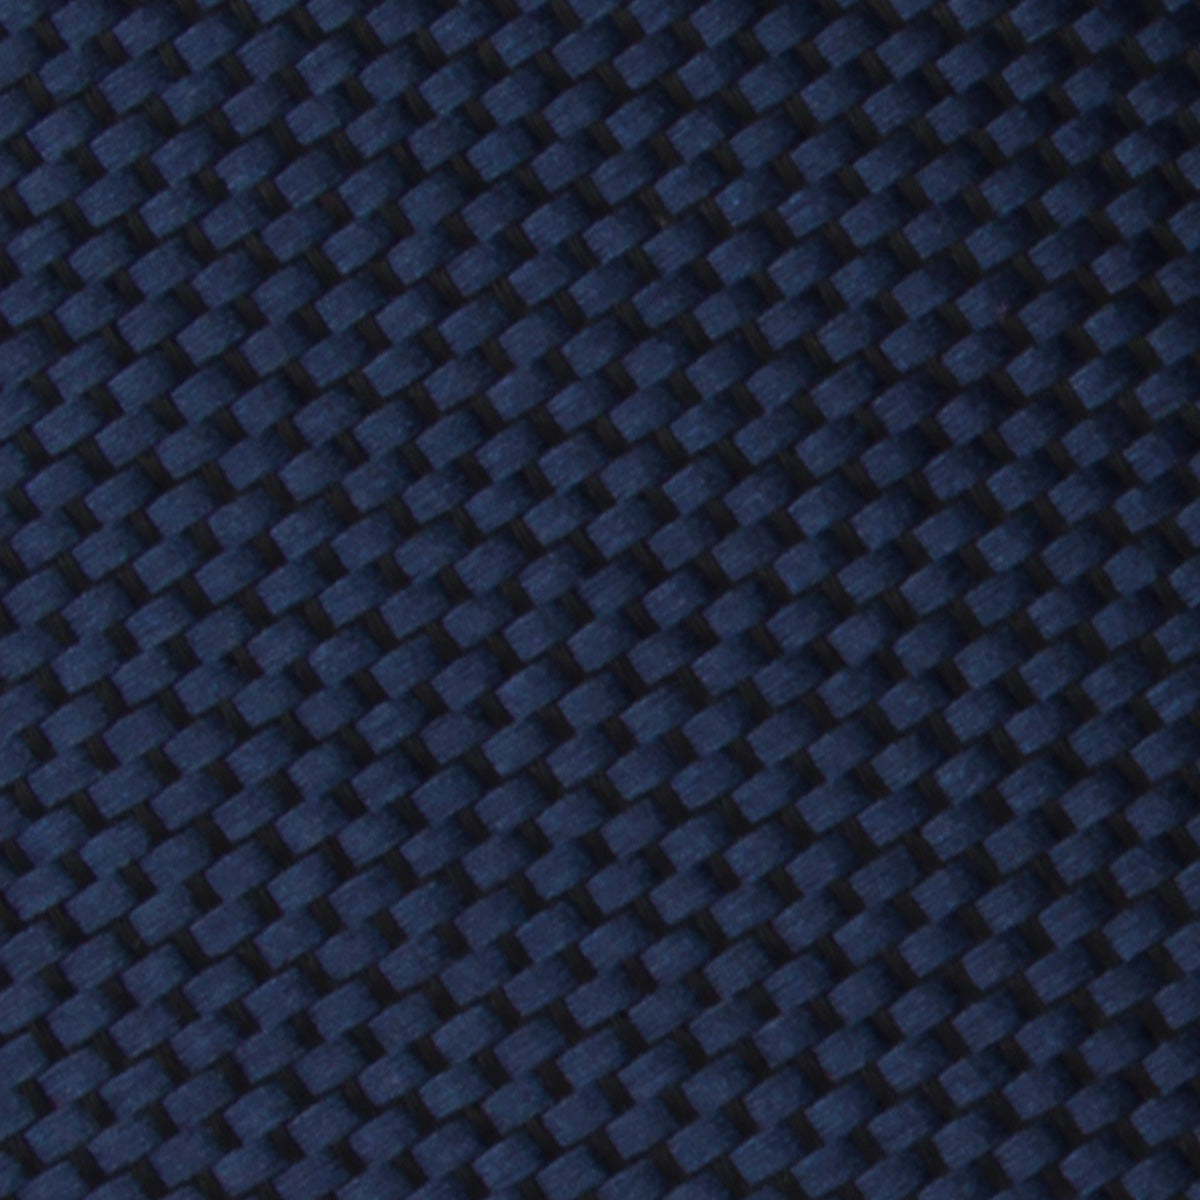 Midnight Blue Oxford Weave Pocket Square Fabric